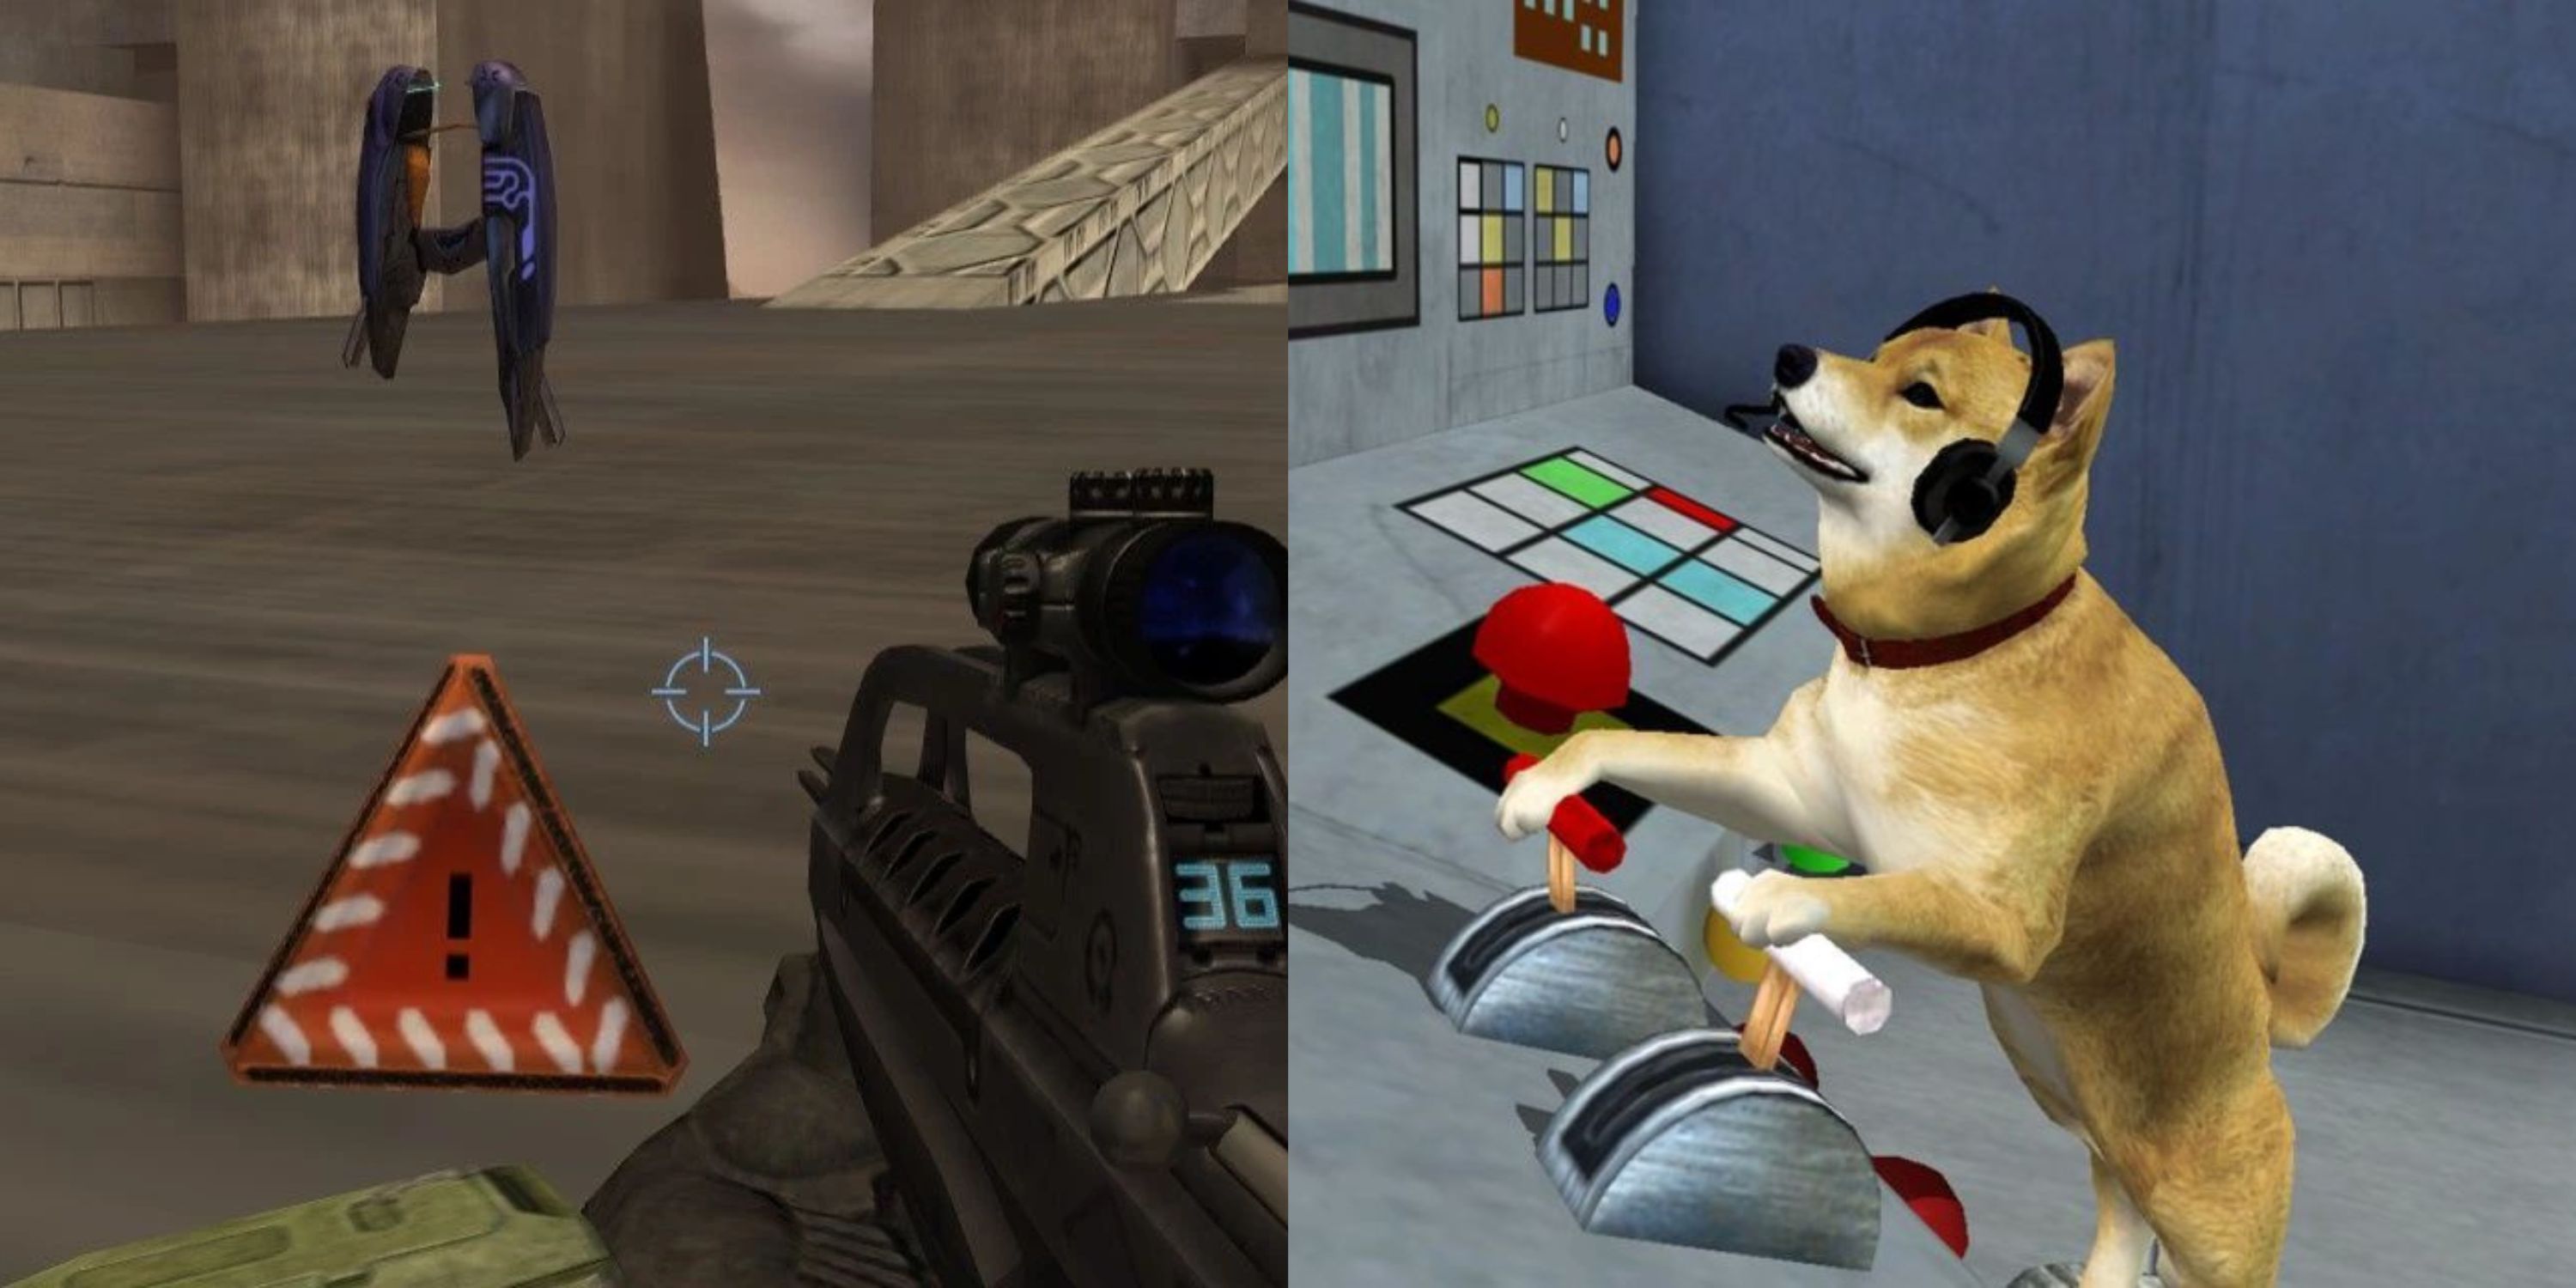 Featured image split the Scarab Gun in Halo 2 and the secret Dog Ending easter egg in Silent Hill 2